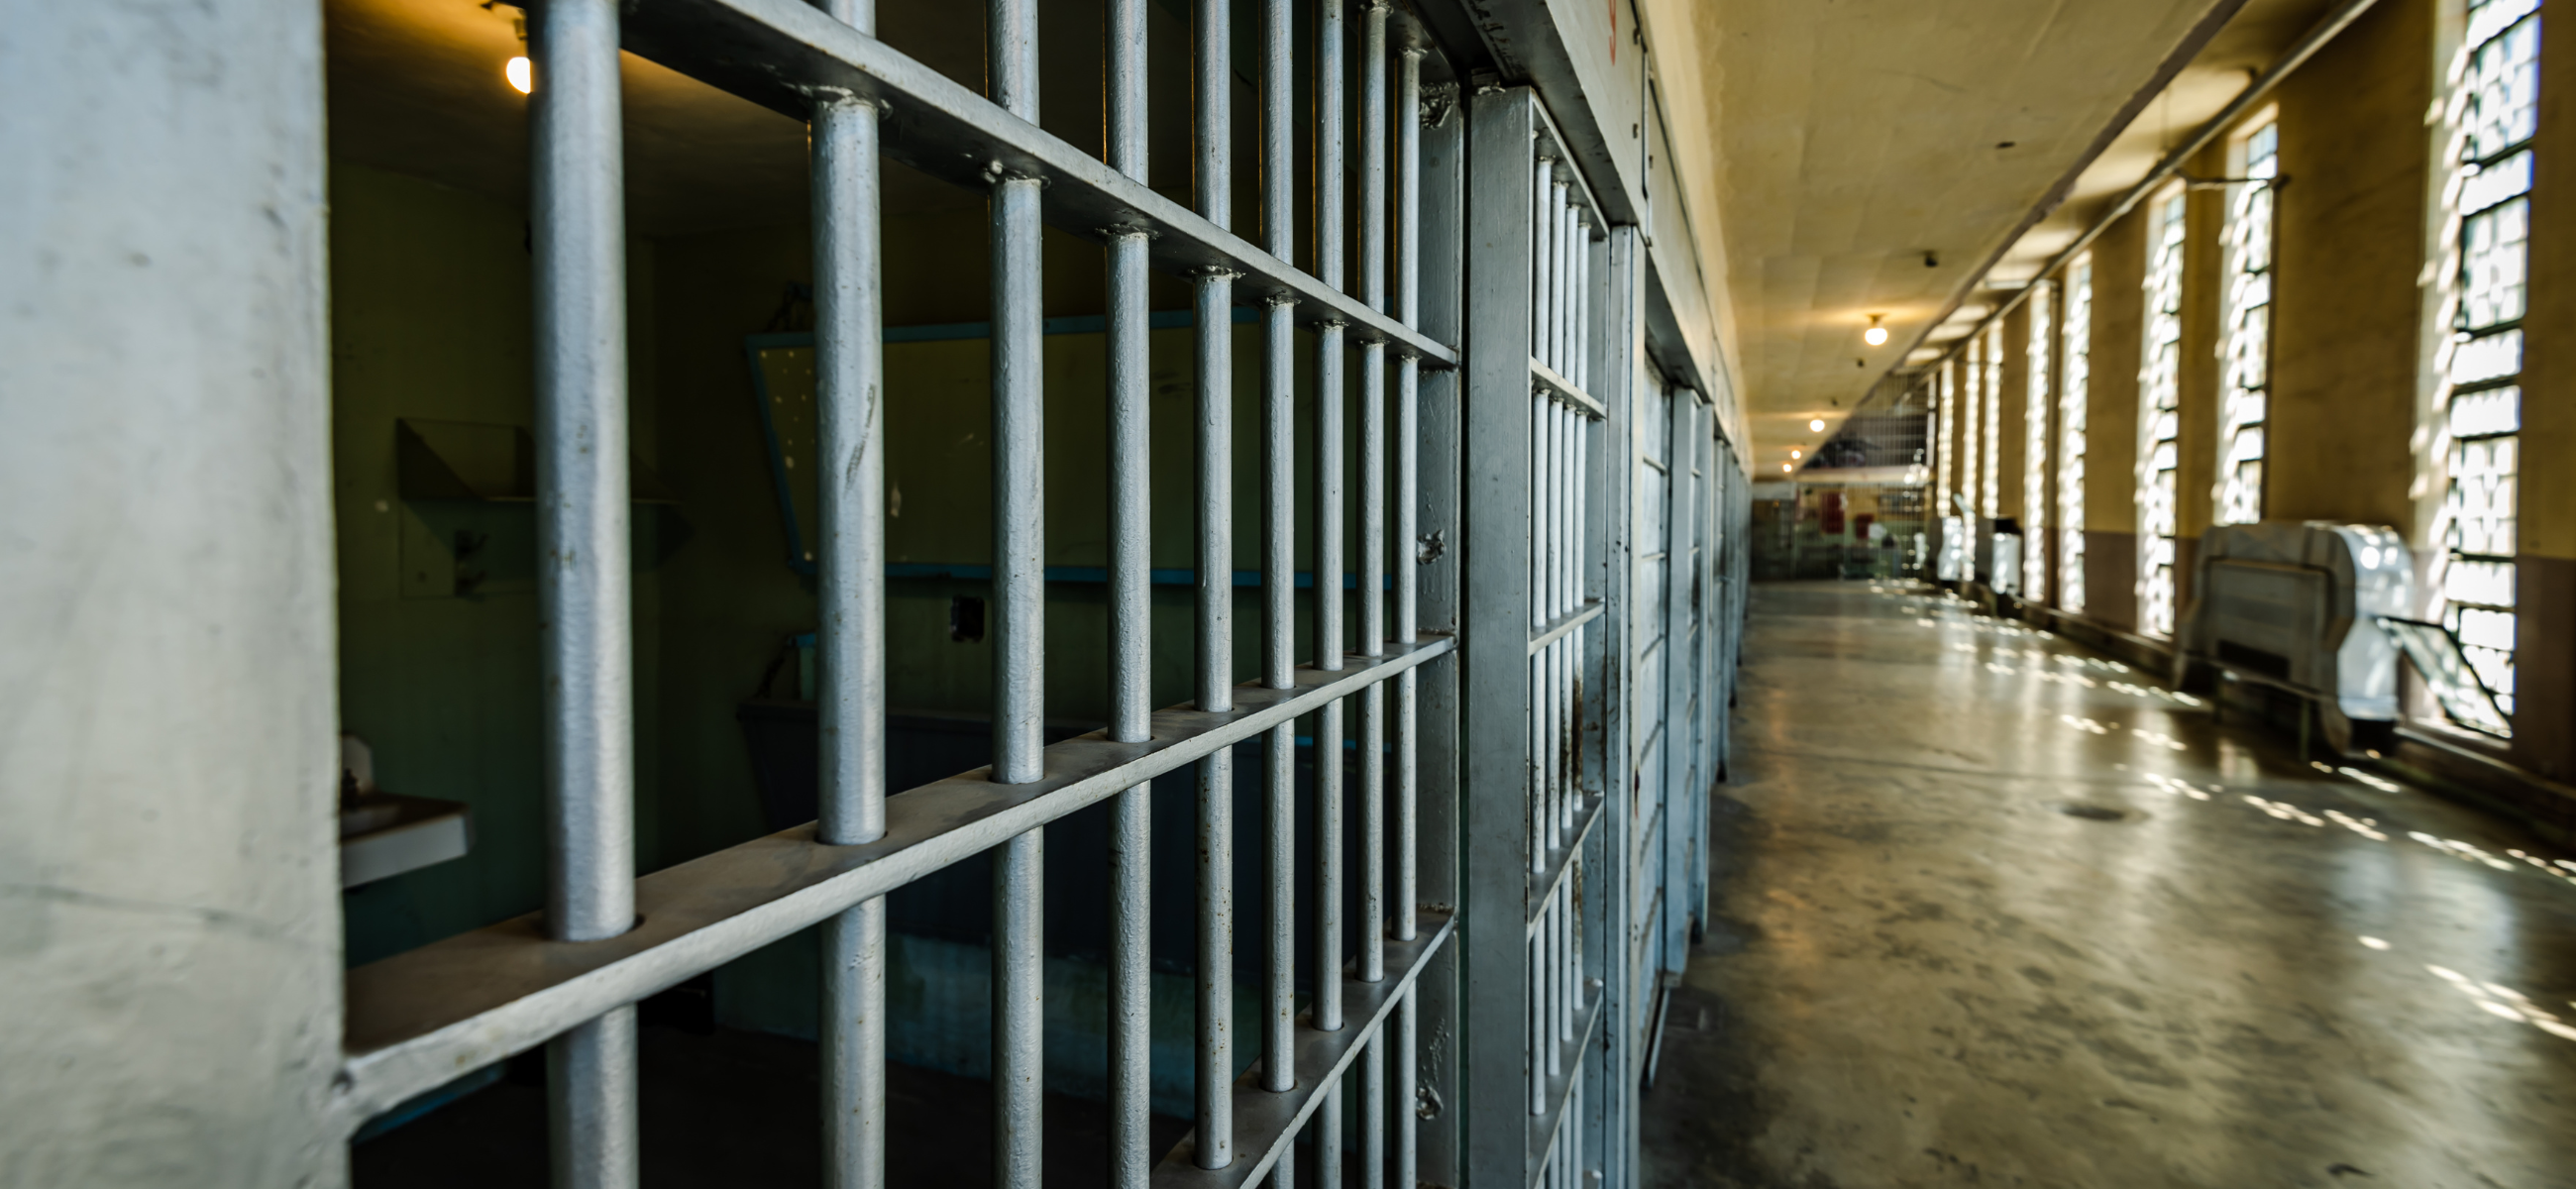 A stock image of a prison cell block.